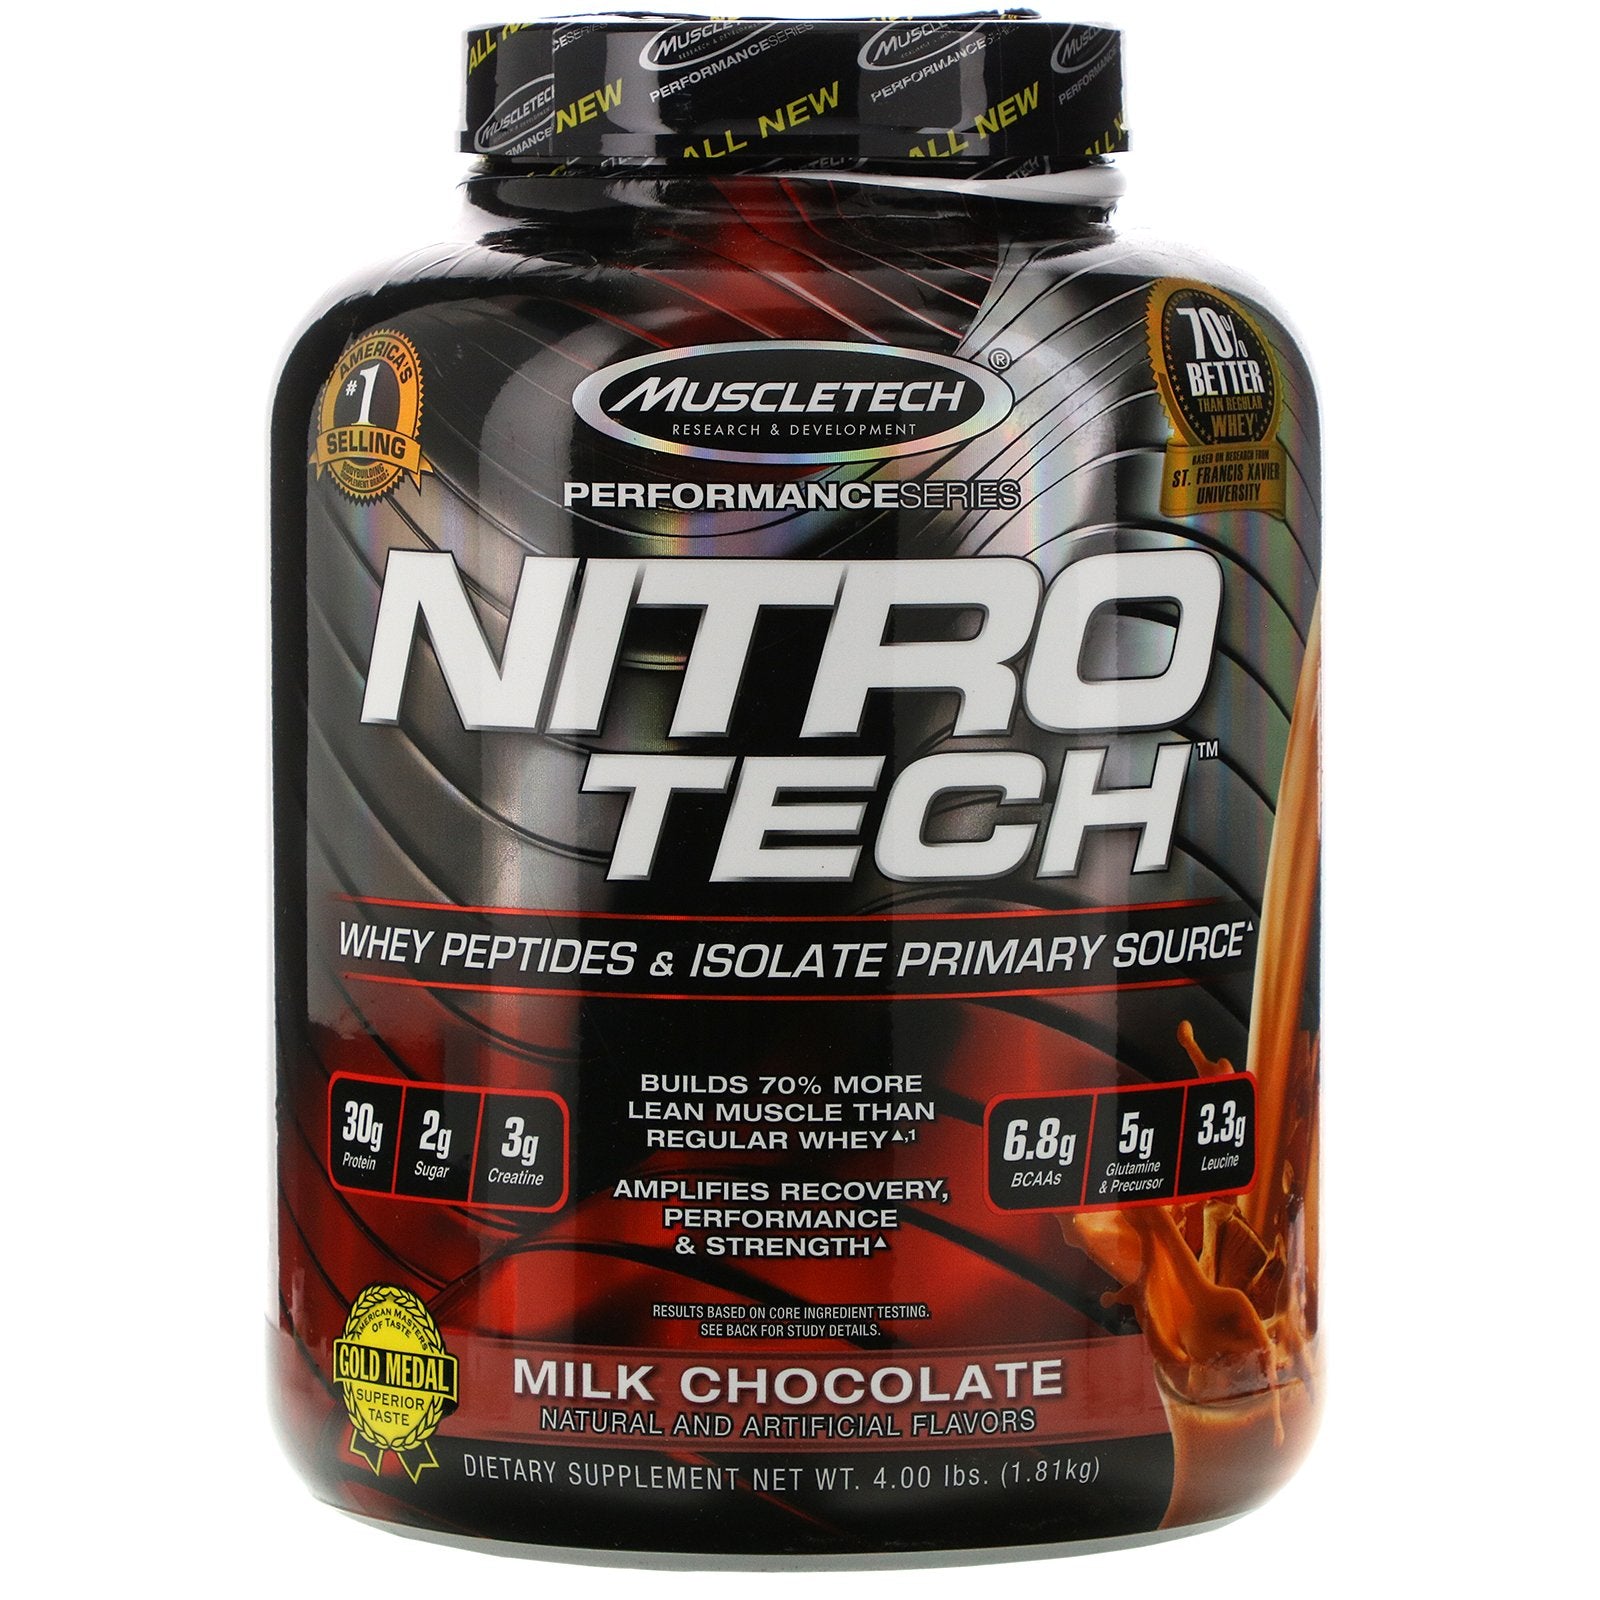 MuscleTech NitroTech is one of the cheapest whey available